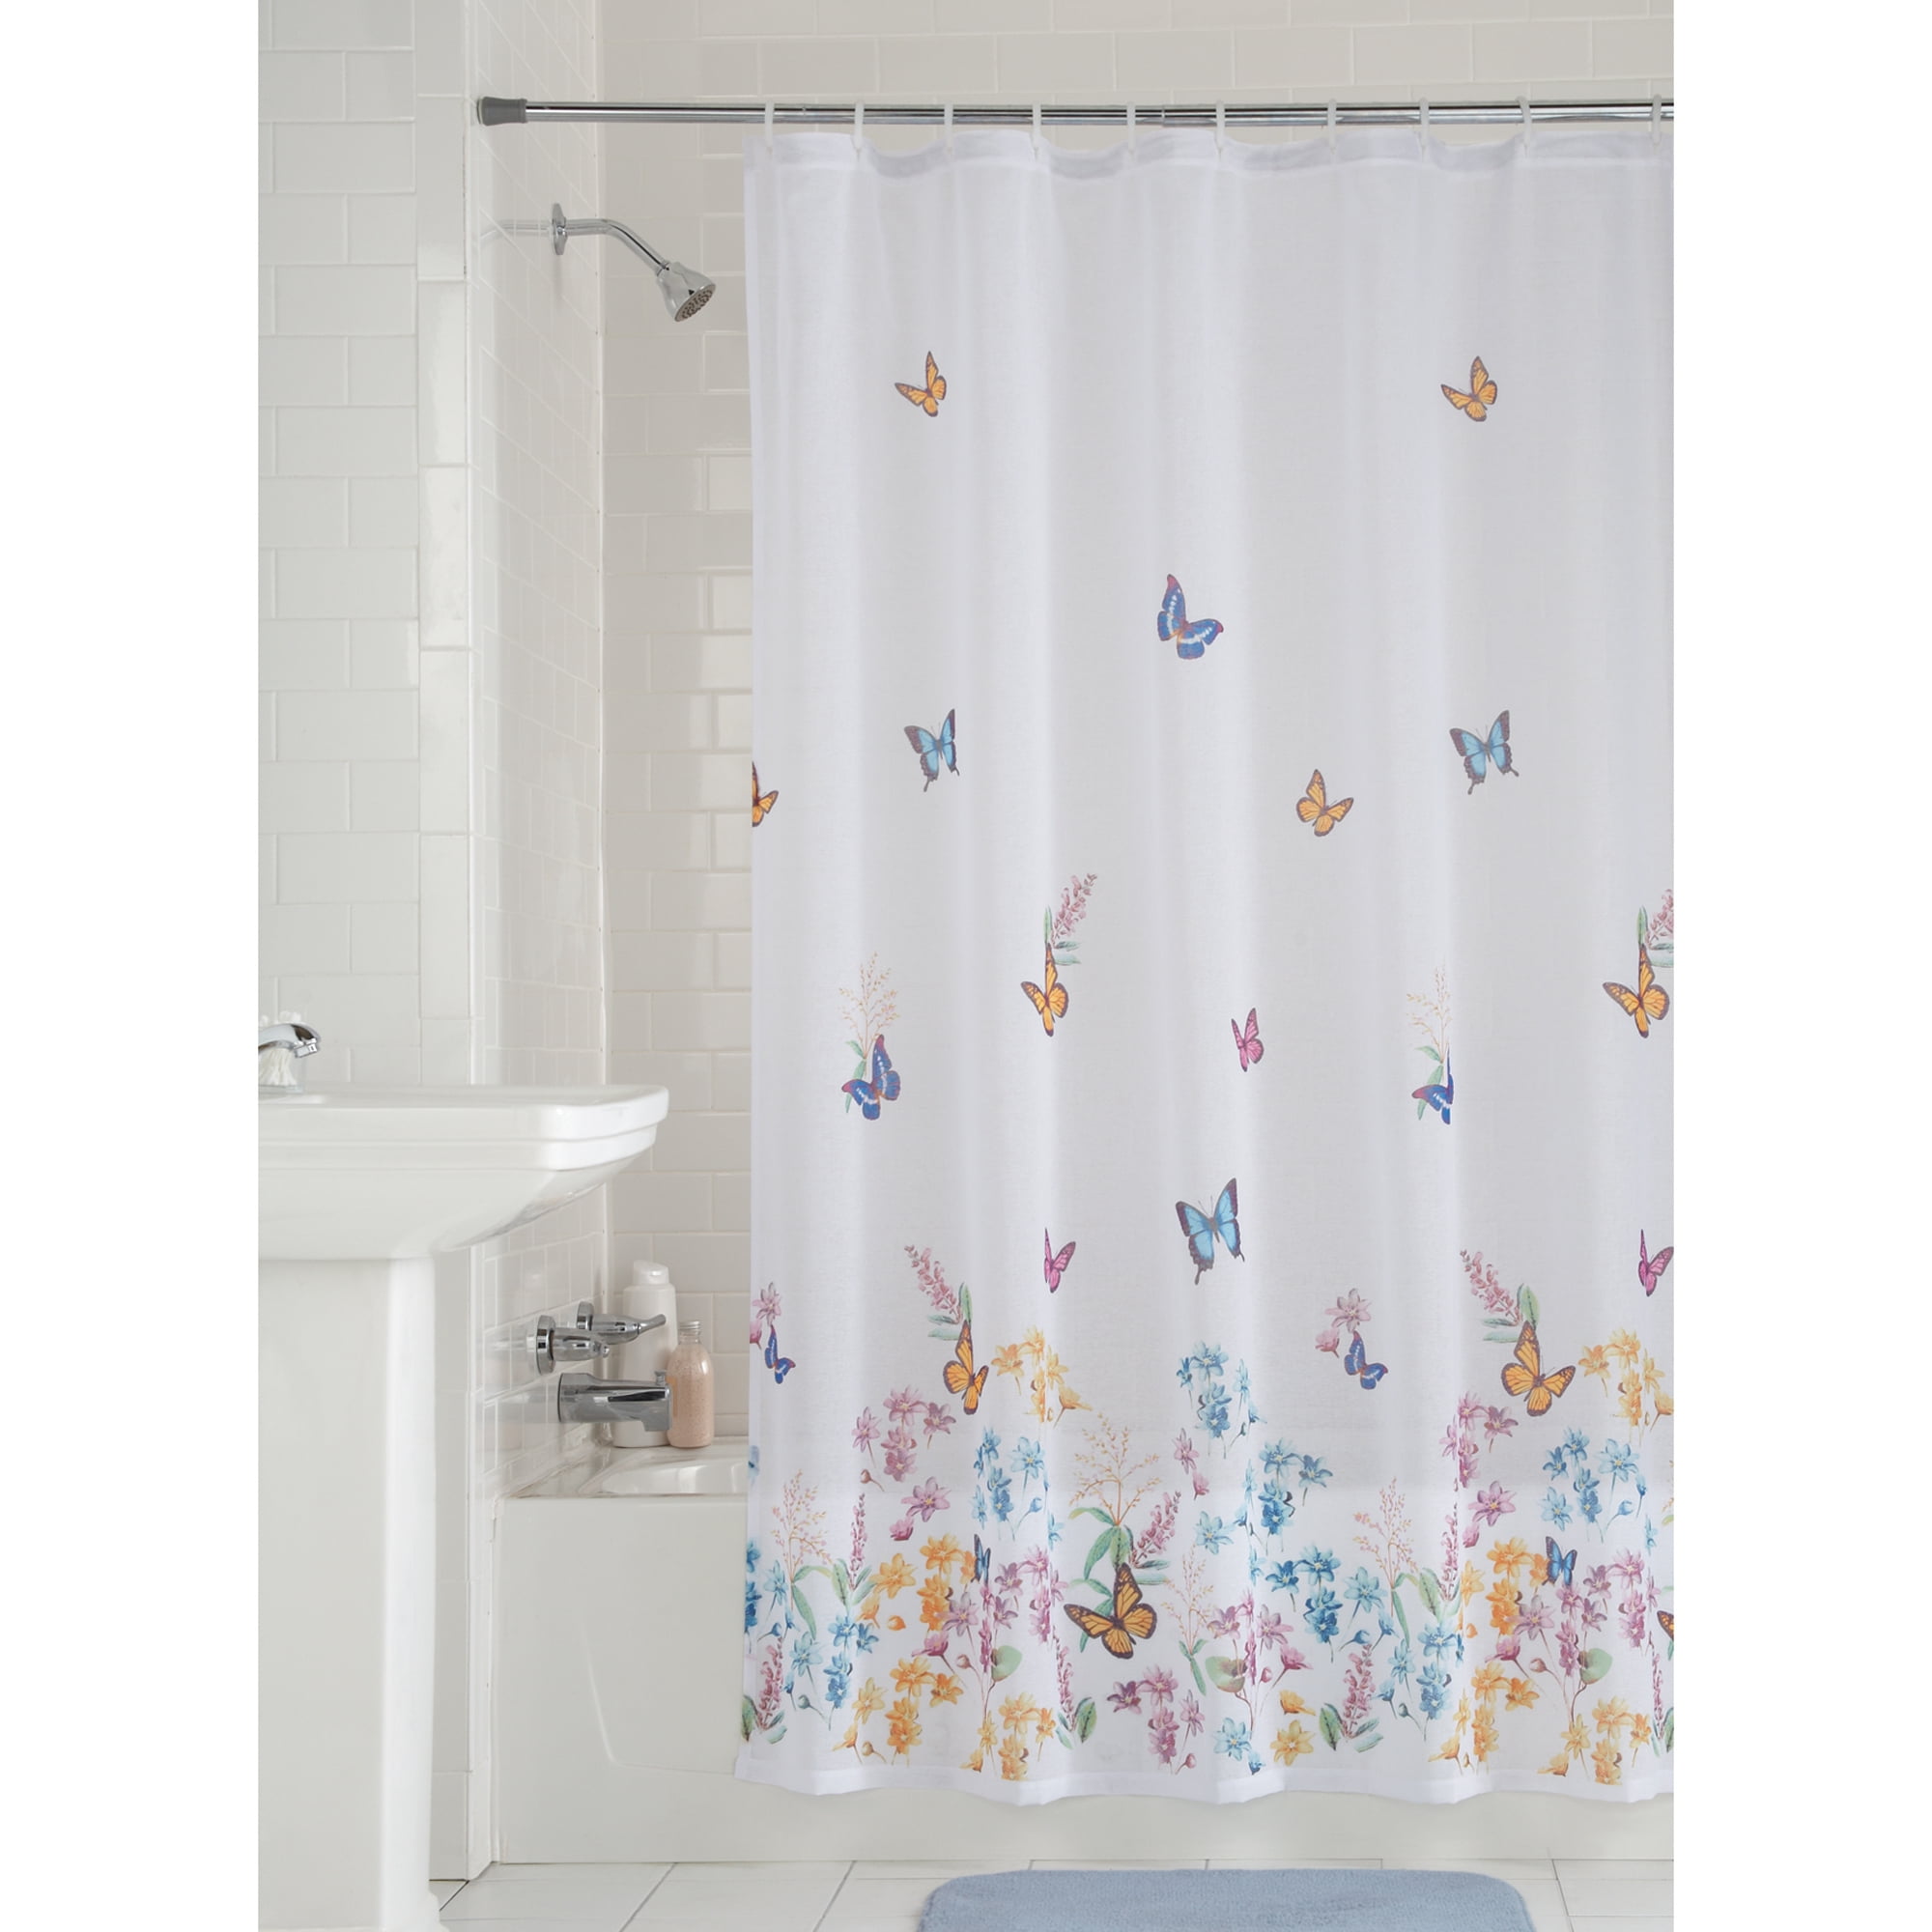 1 Pc Waterproof Blue Butterfly Shower Curtain for Home /& Bathroom